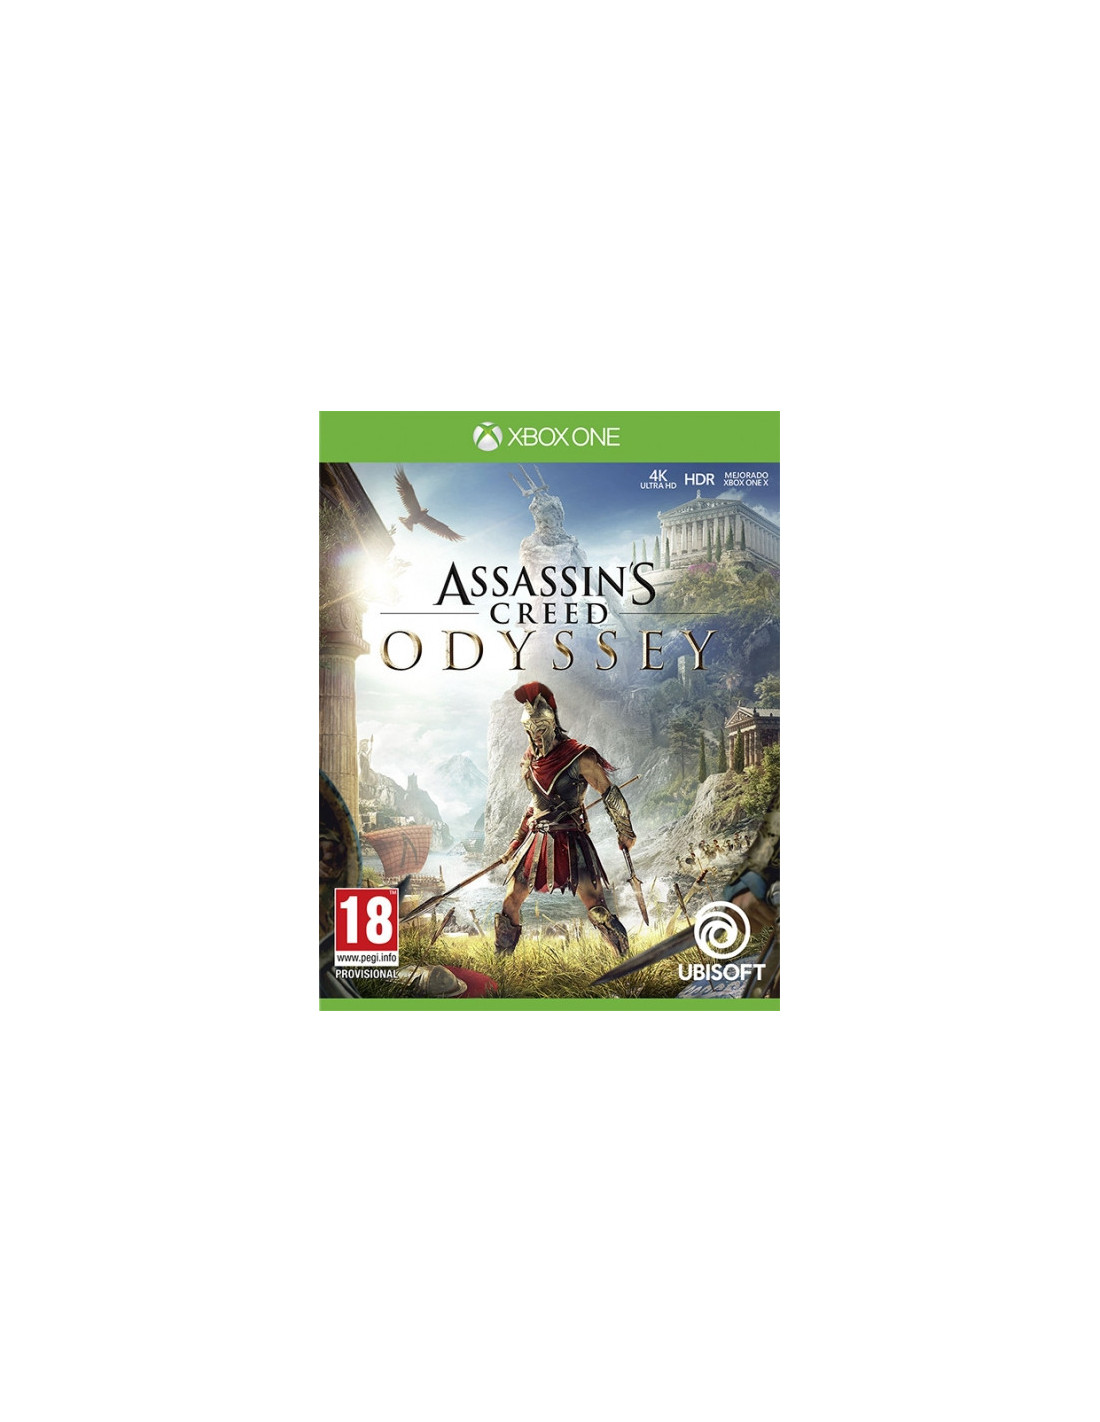 Xbox - Assassin's Creed Odyssey